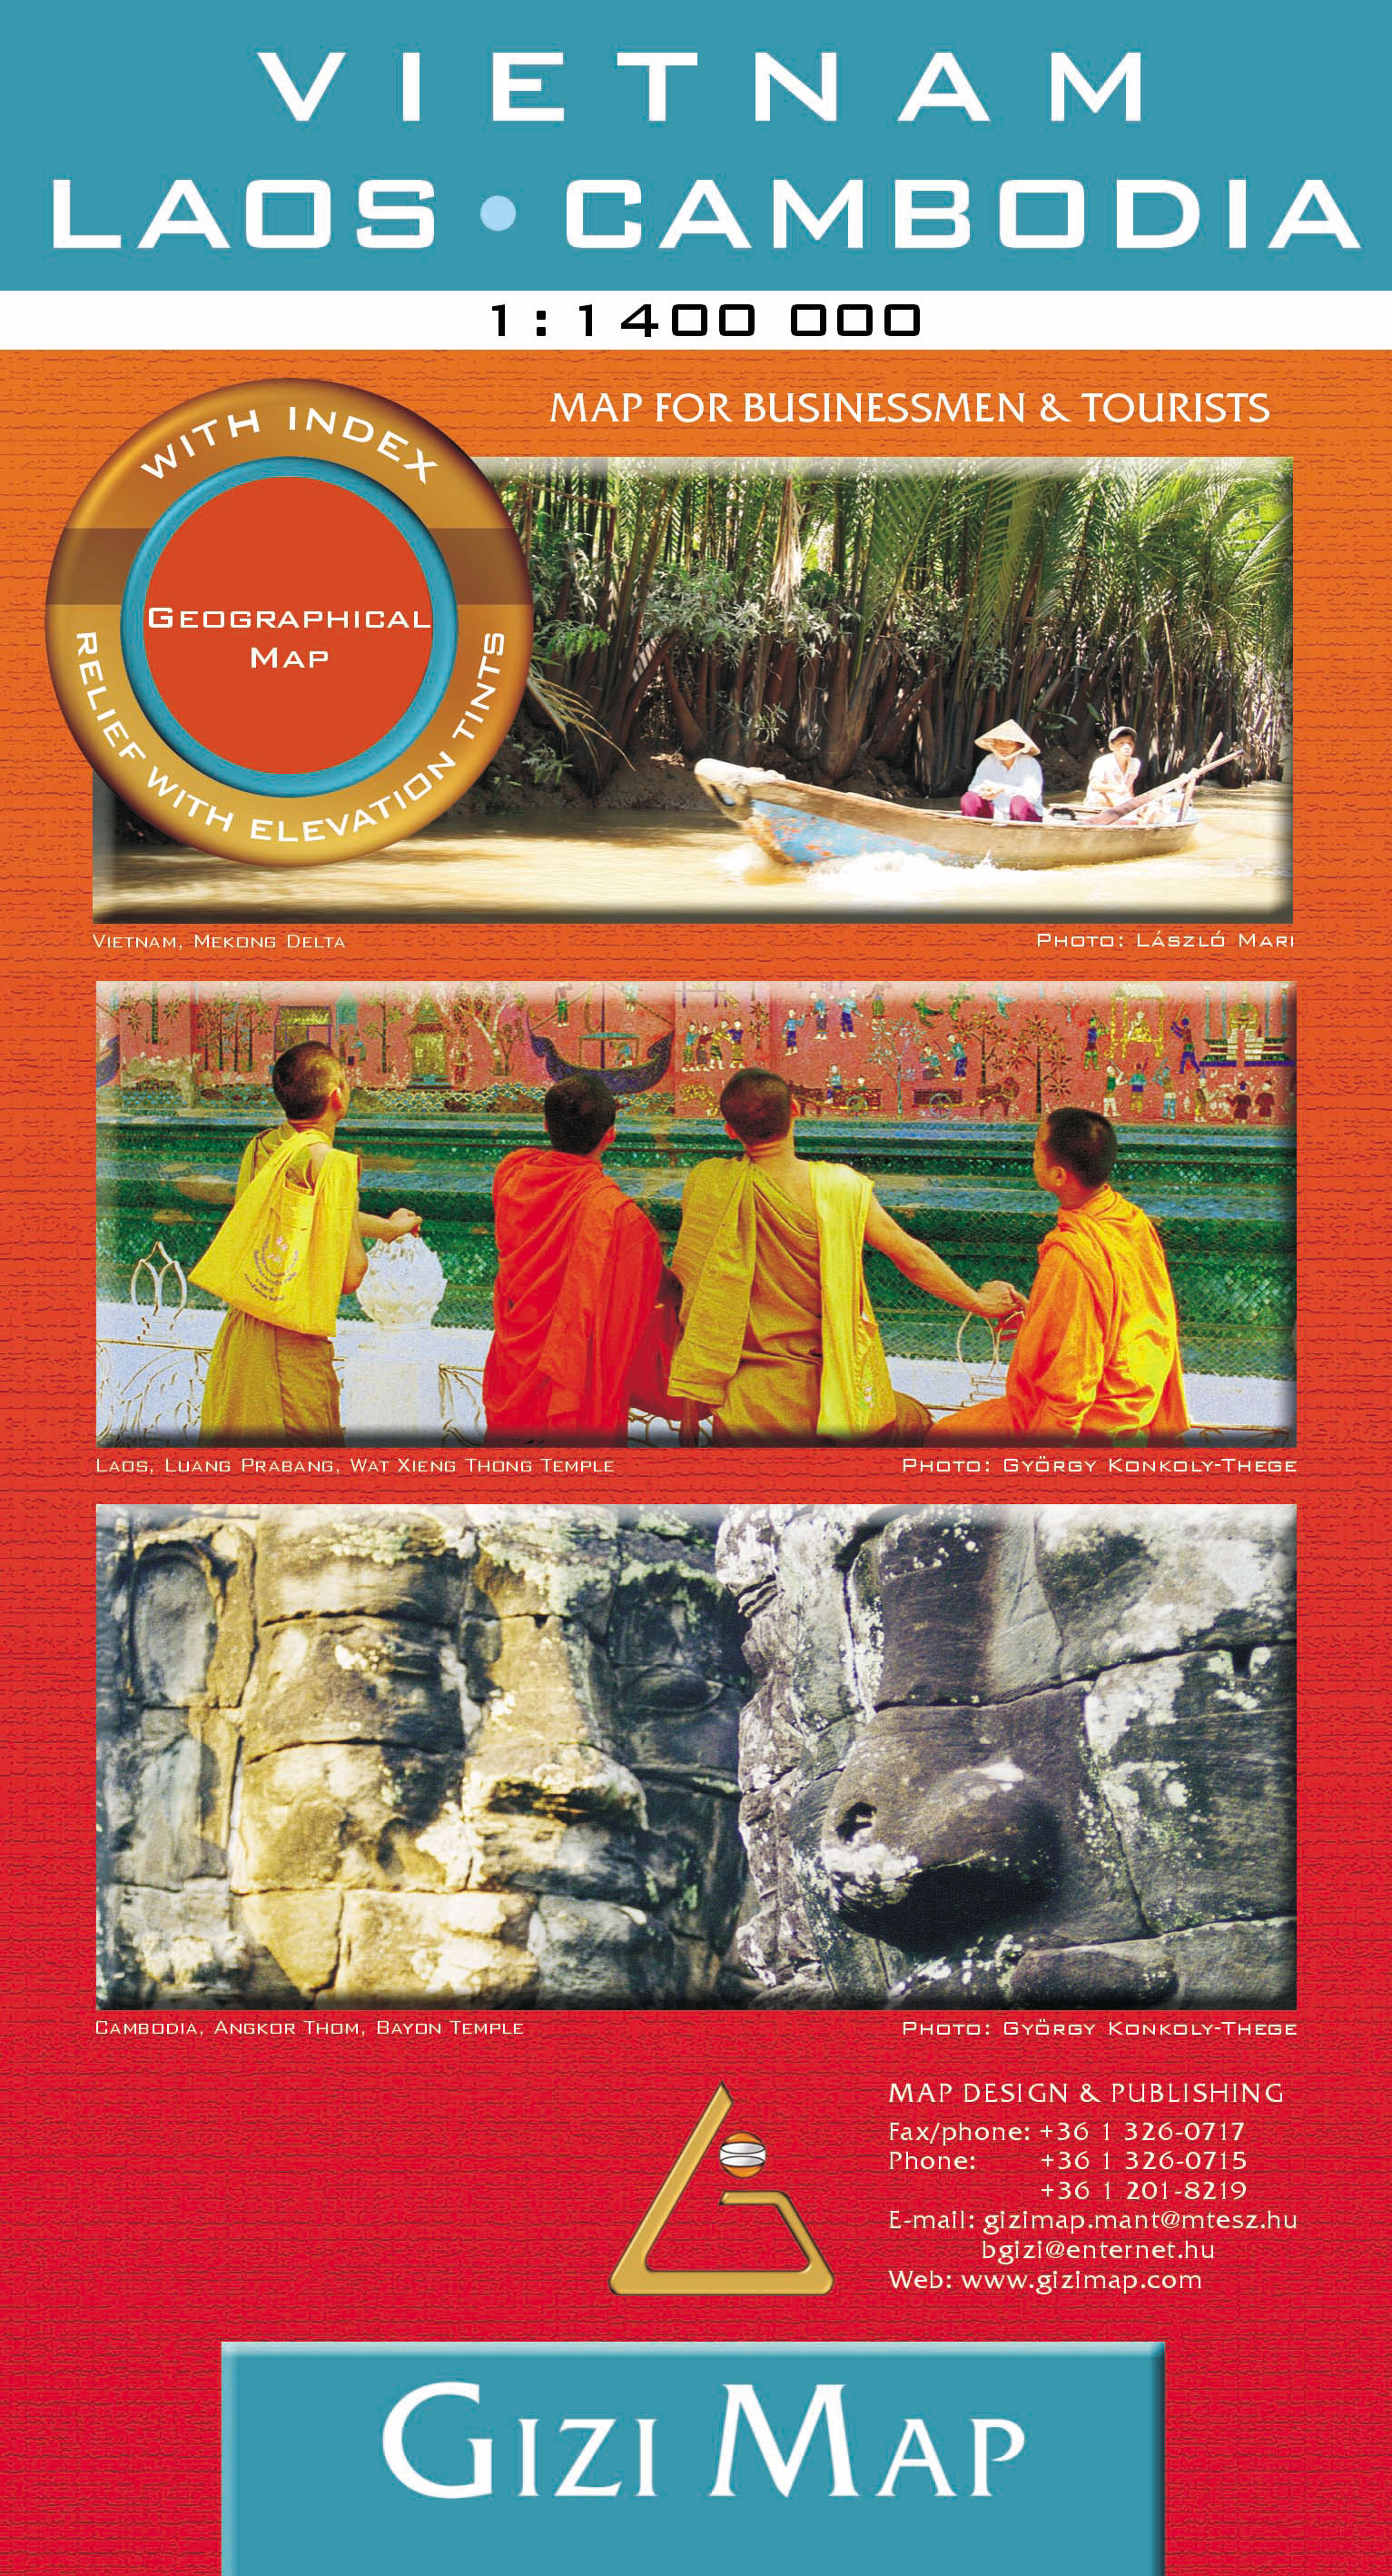 Vietnam, Laos, Cambodia road map with geographical colouring and tourist info. Fully indexed